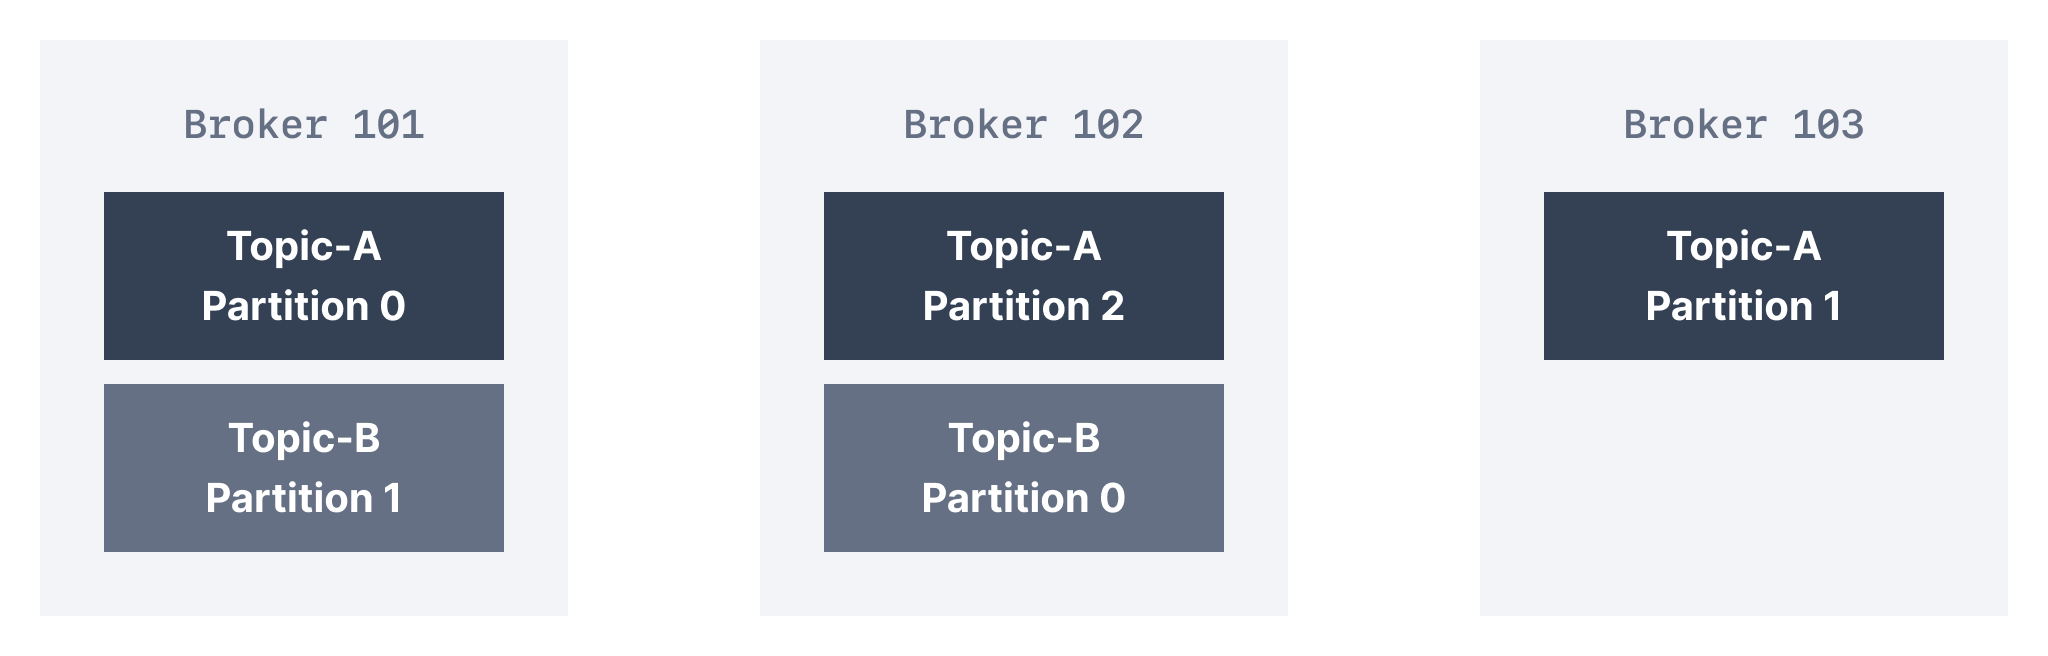 3 Kafka Brokers with 2 Kafka Topics and topic partitions.